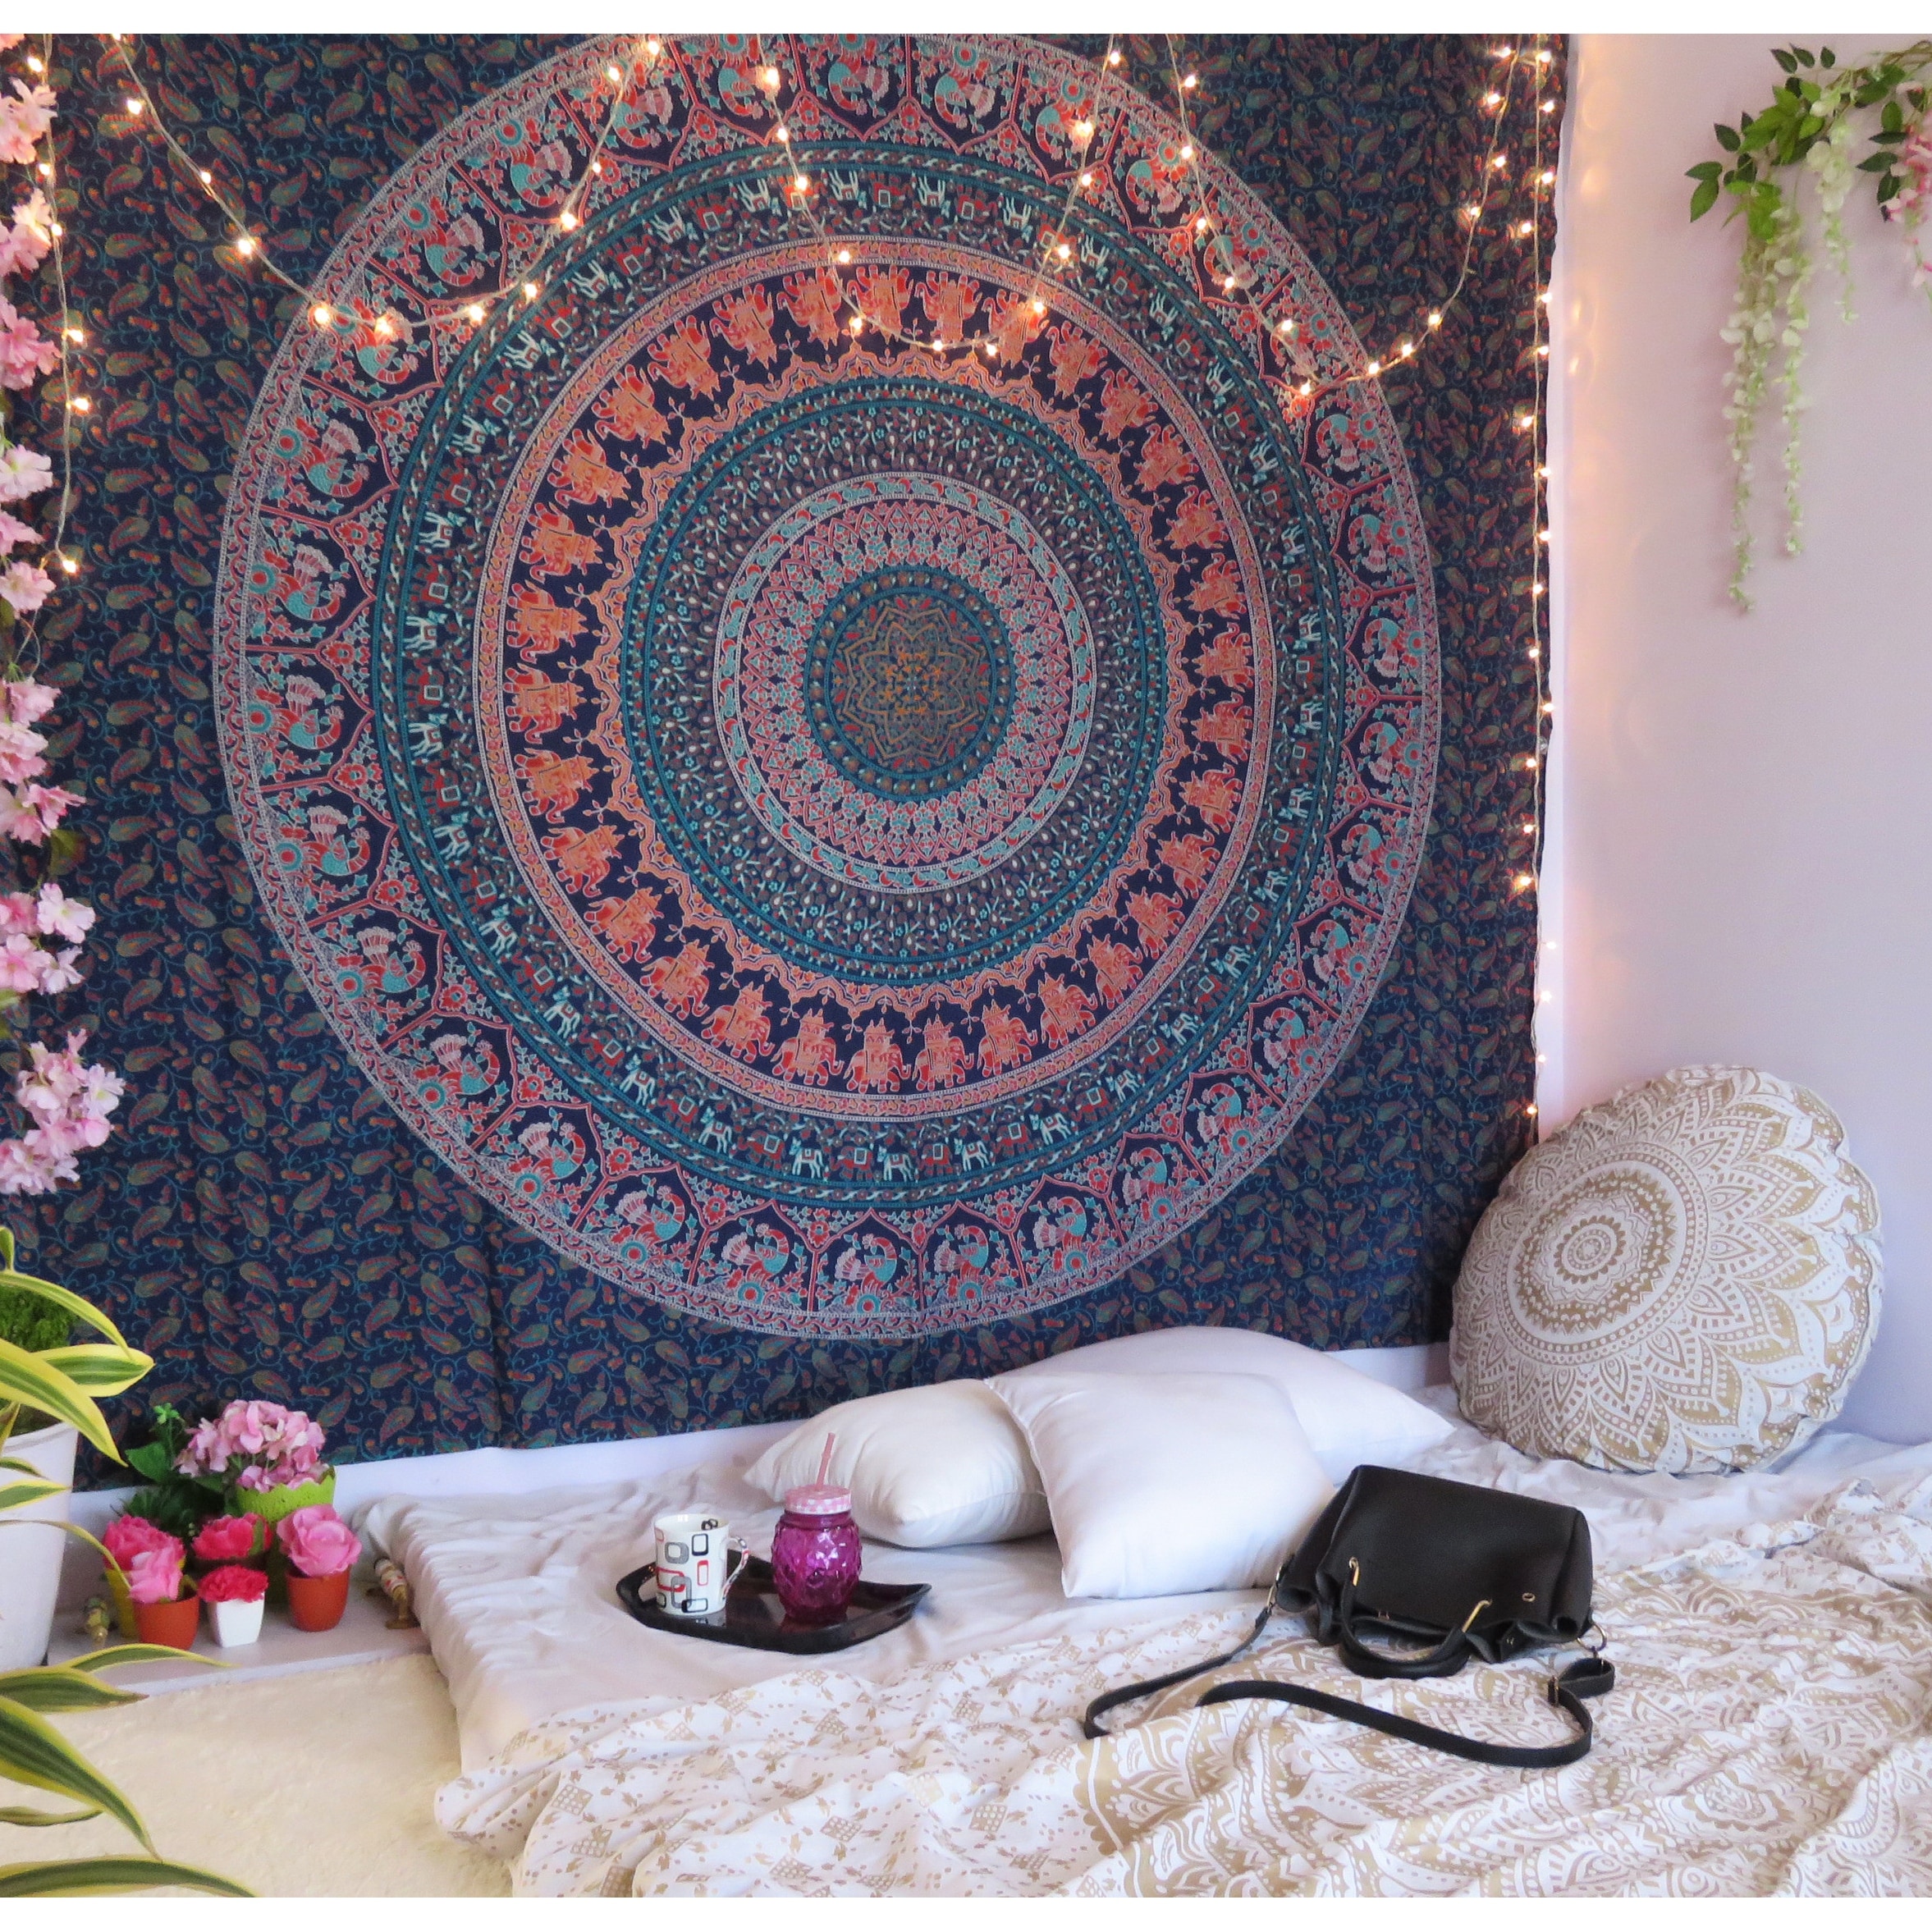 Ombre Bohemian Mandala Hippies Wall Tapestry Round Beach Bedspread Yoga Mat Red 